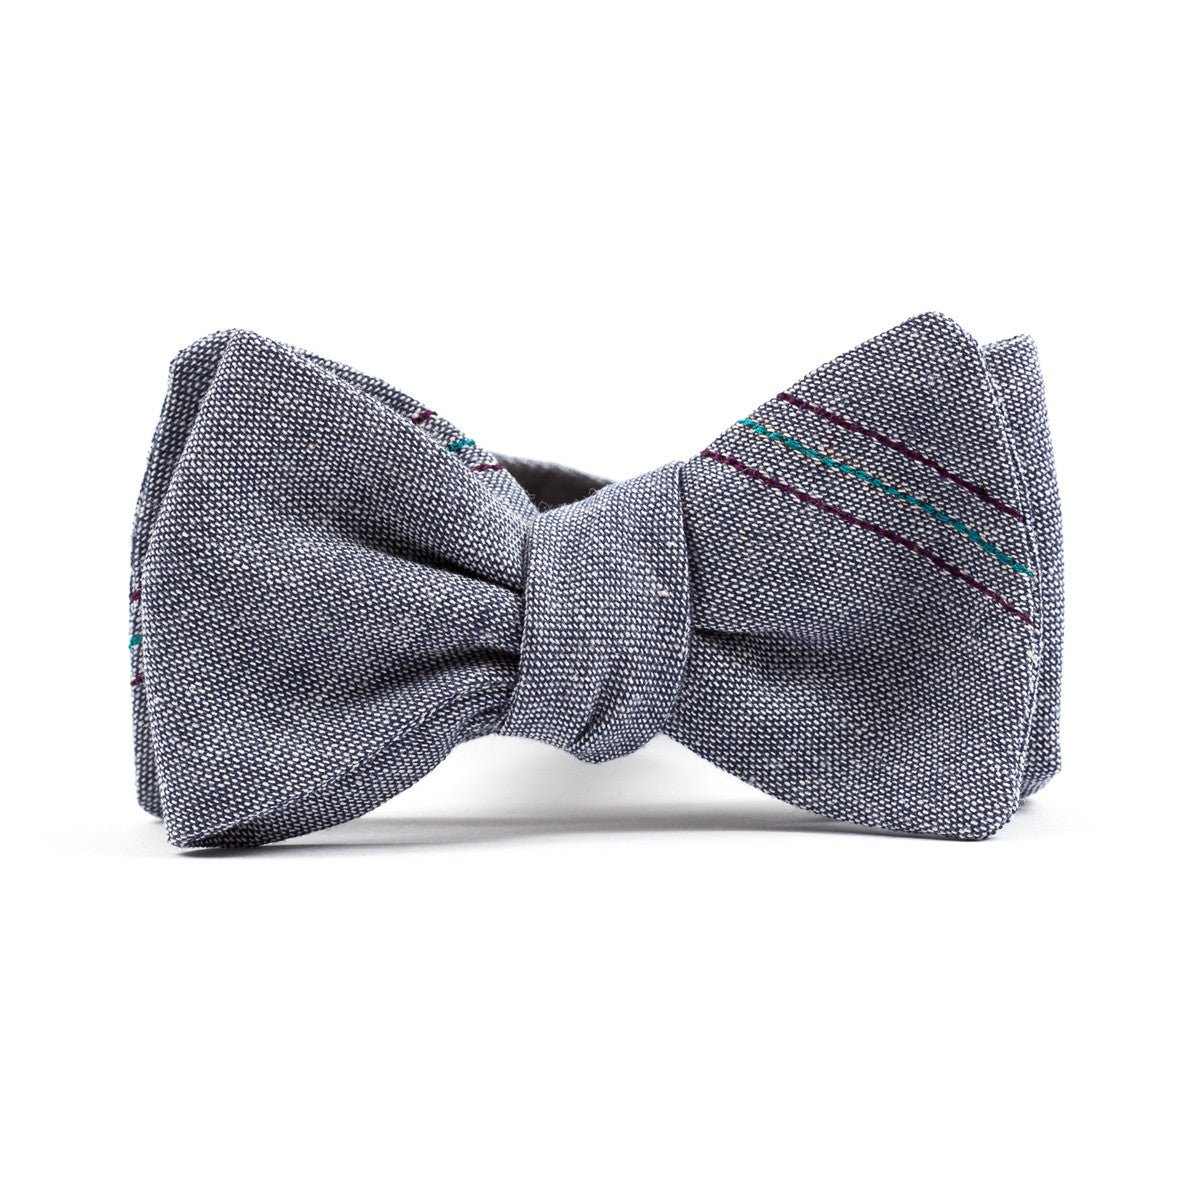 Chambray and Solid Bow Ties | The Cordial Churchman